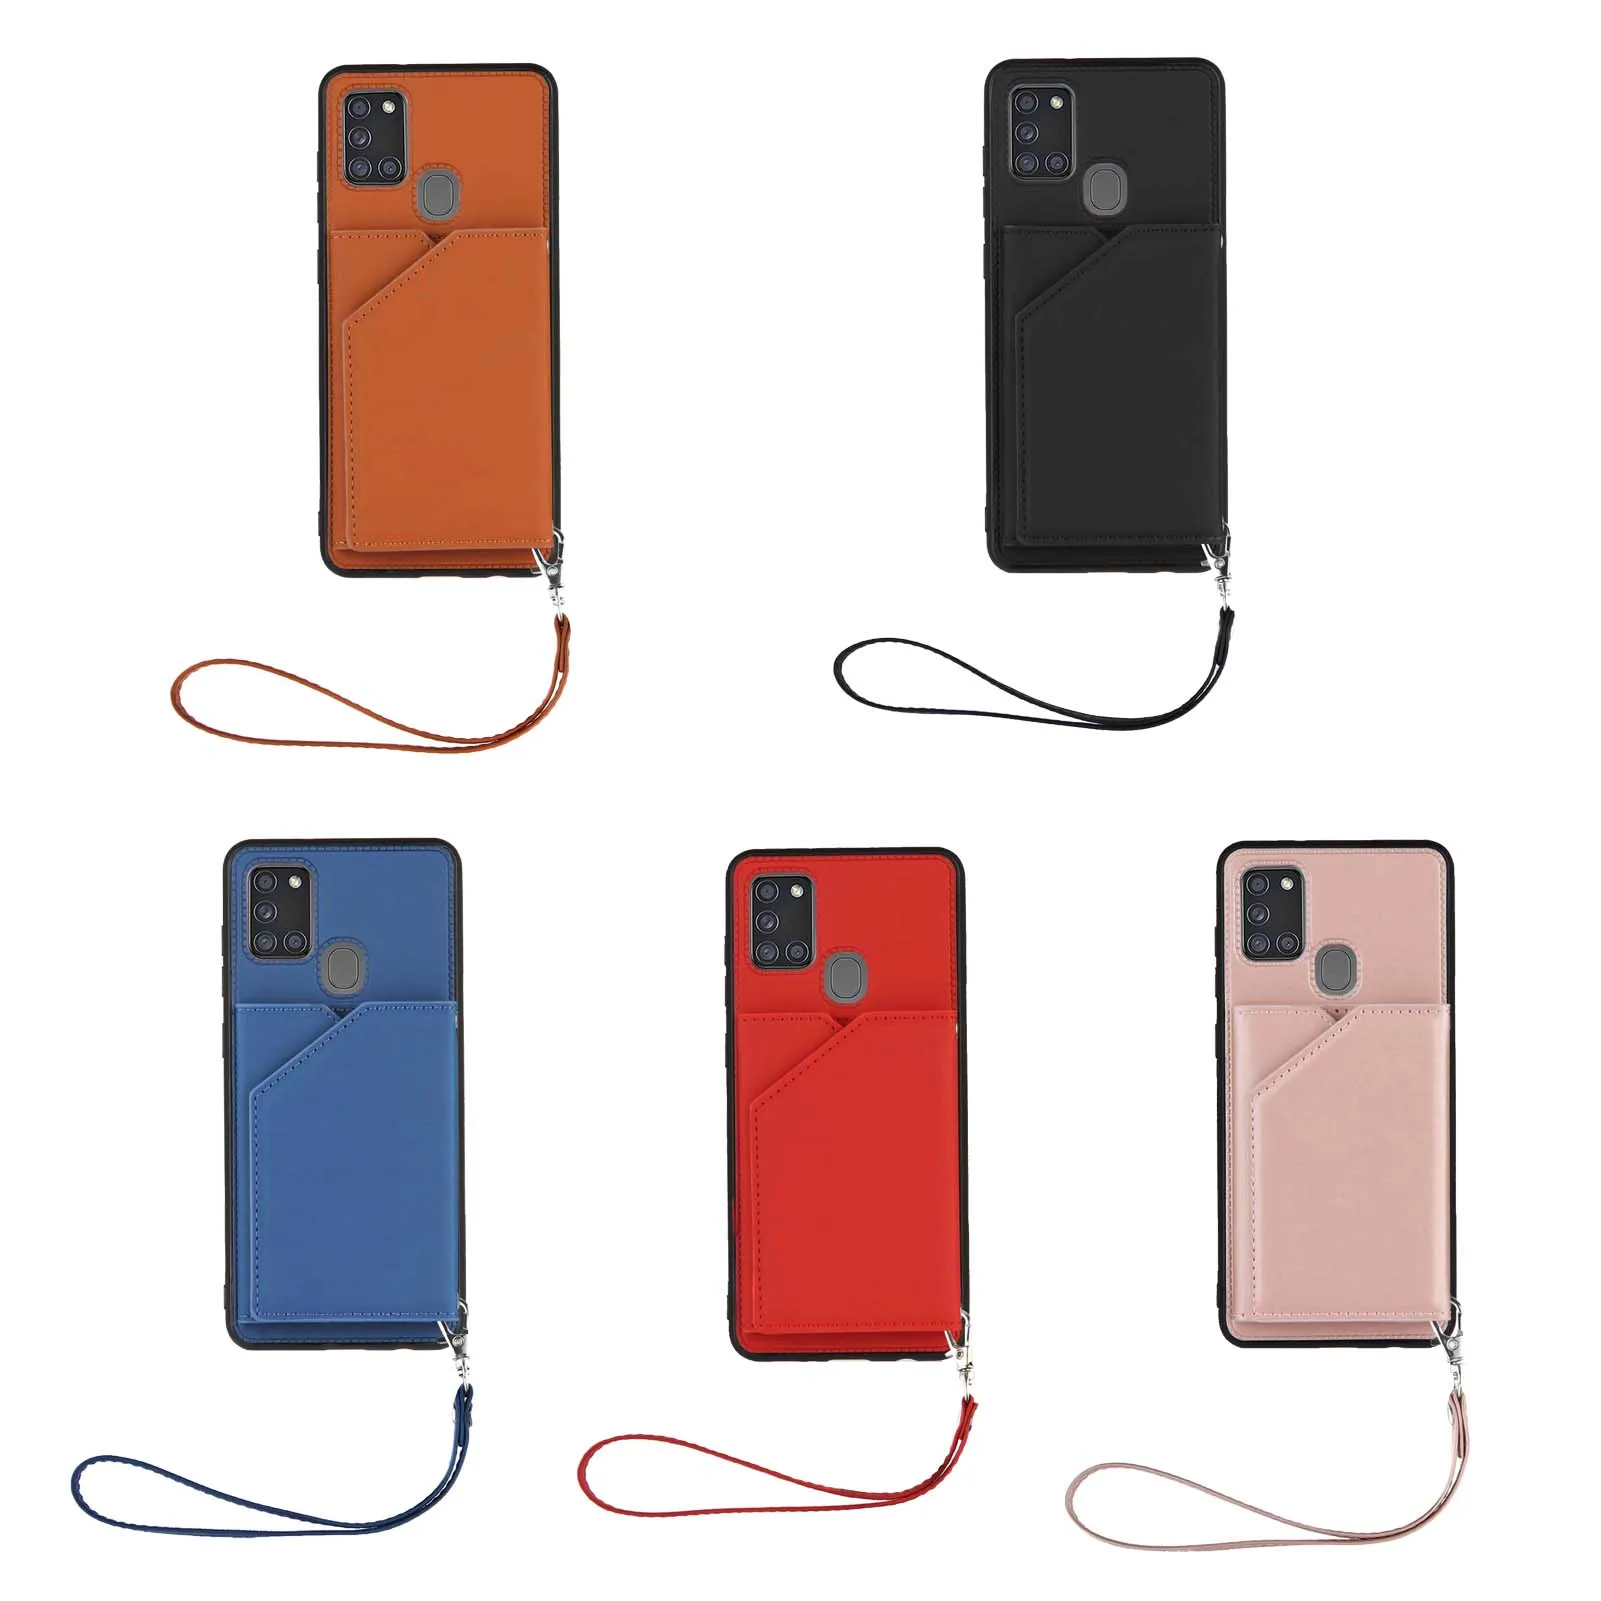 

S20 FE Back Case for Samsung Galaxy M51 Note 20 Ultra A21S A31 A51 A71 A81 A91 A50 A30 Cover Whit Leather Card Package Lanyard